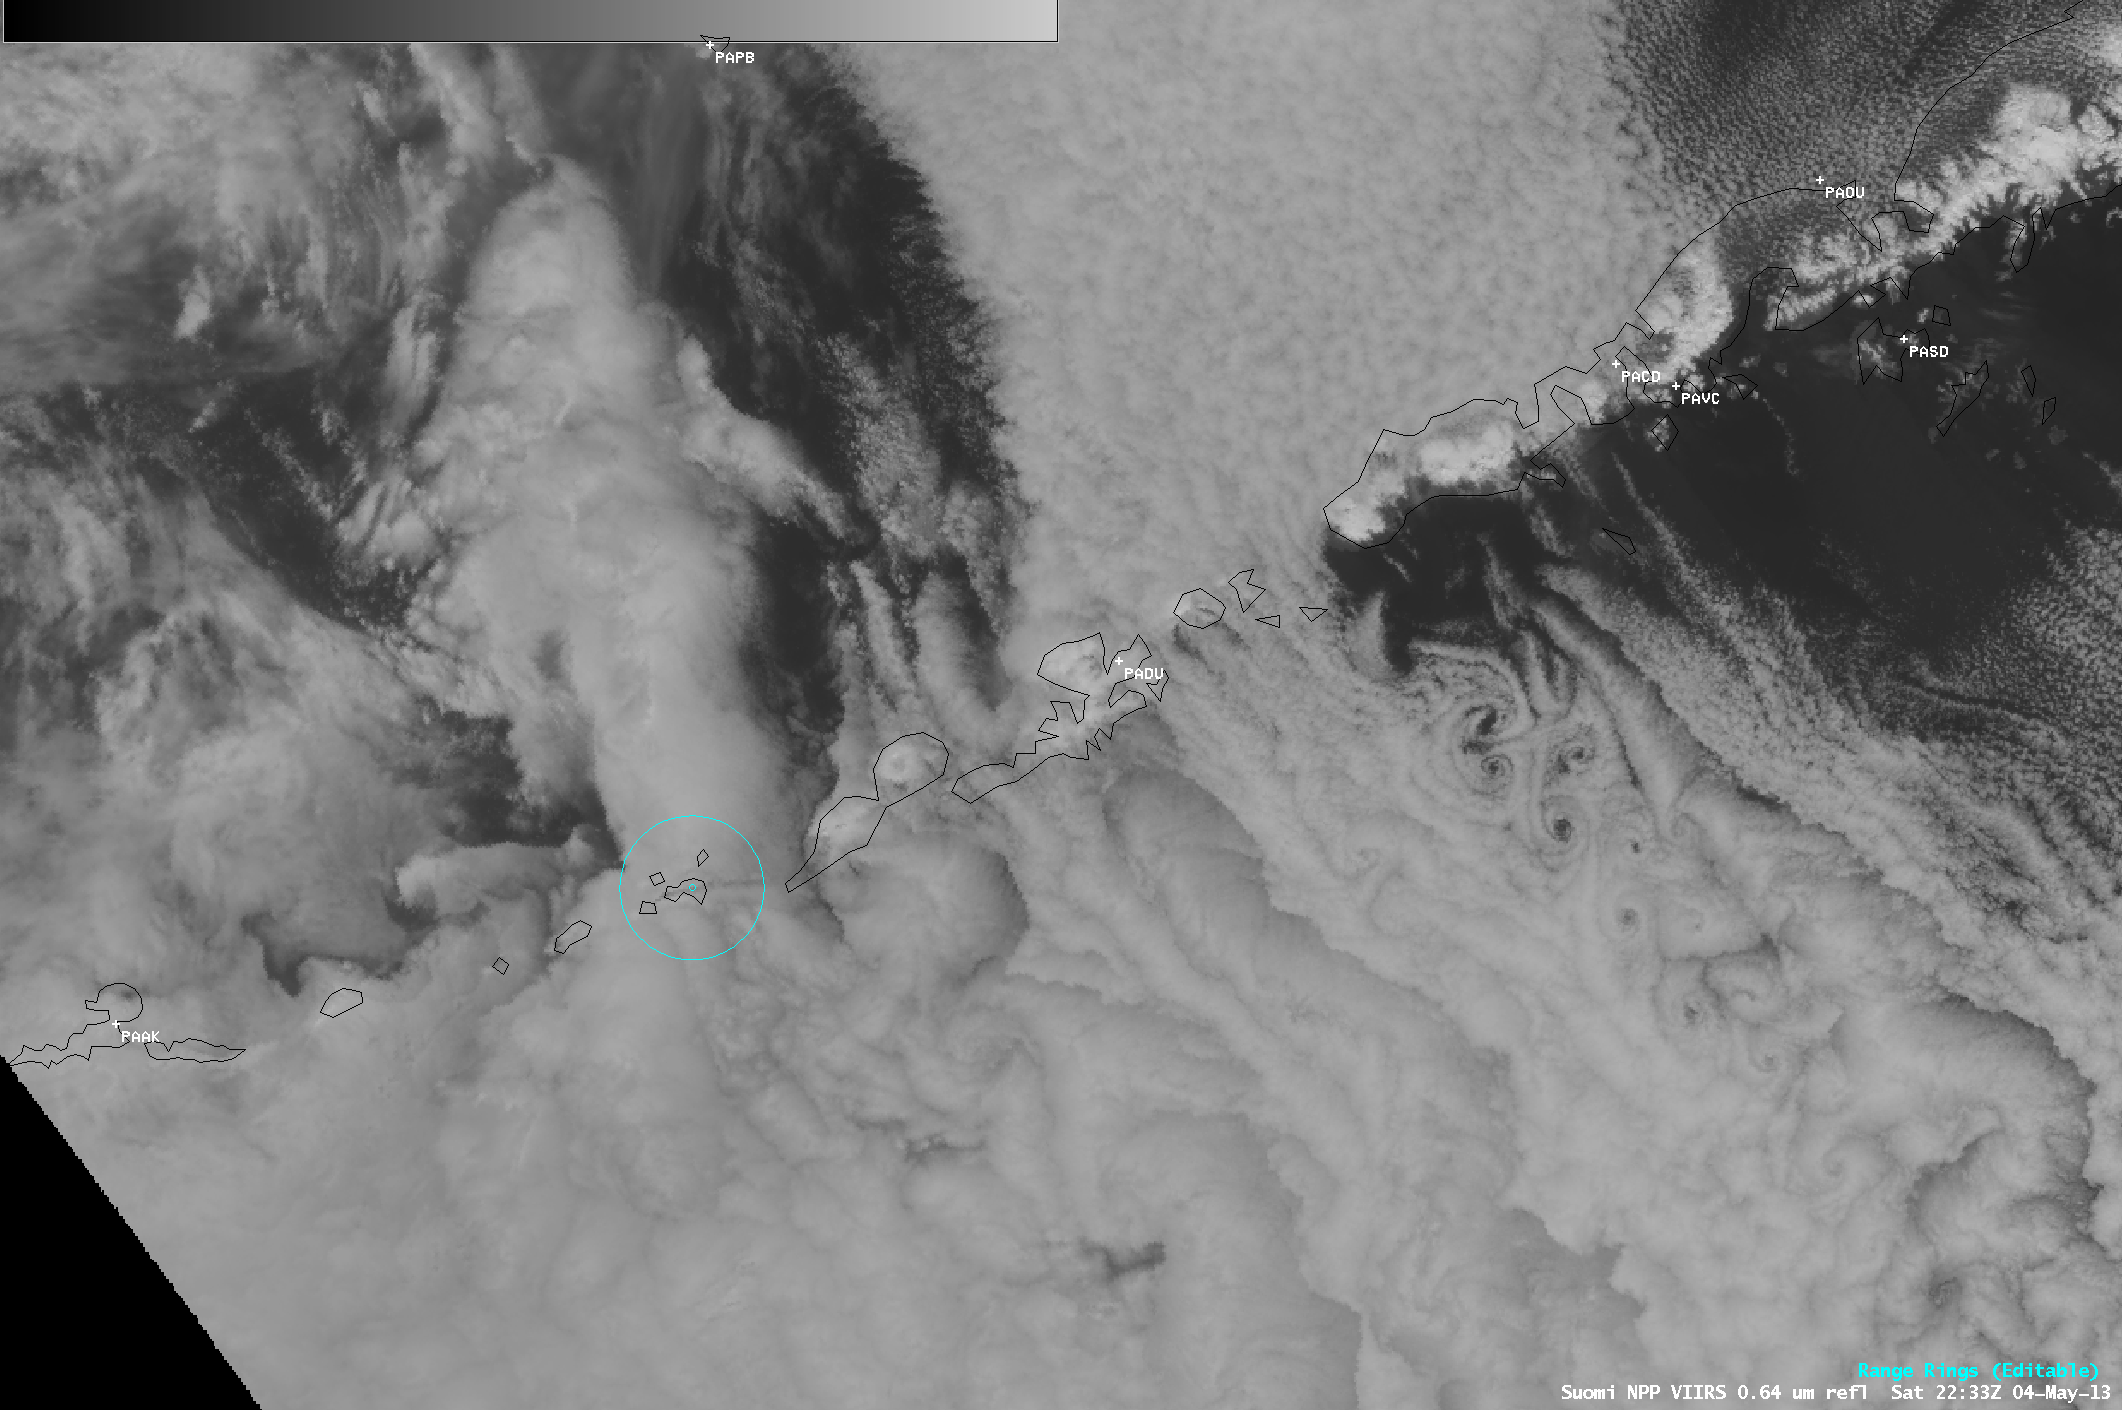 Suomi NPP VIIRS 0.64 Âµm visible channel images